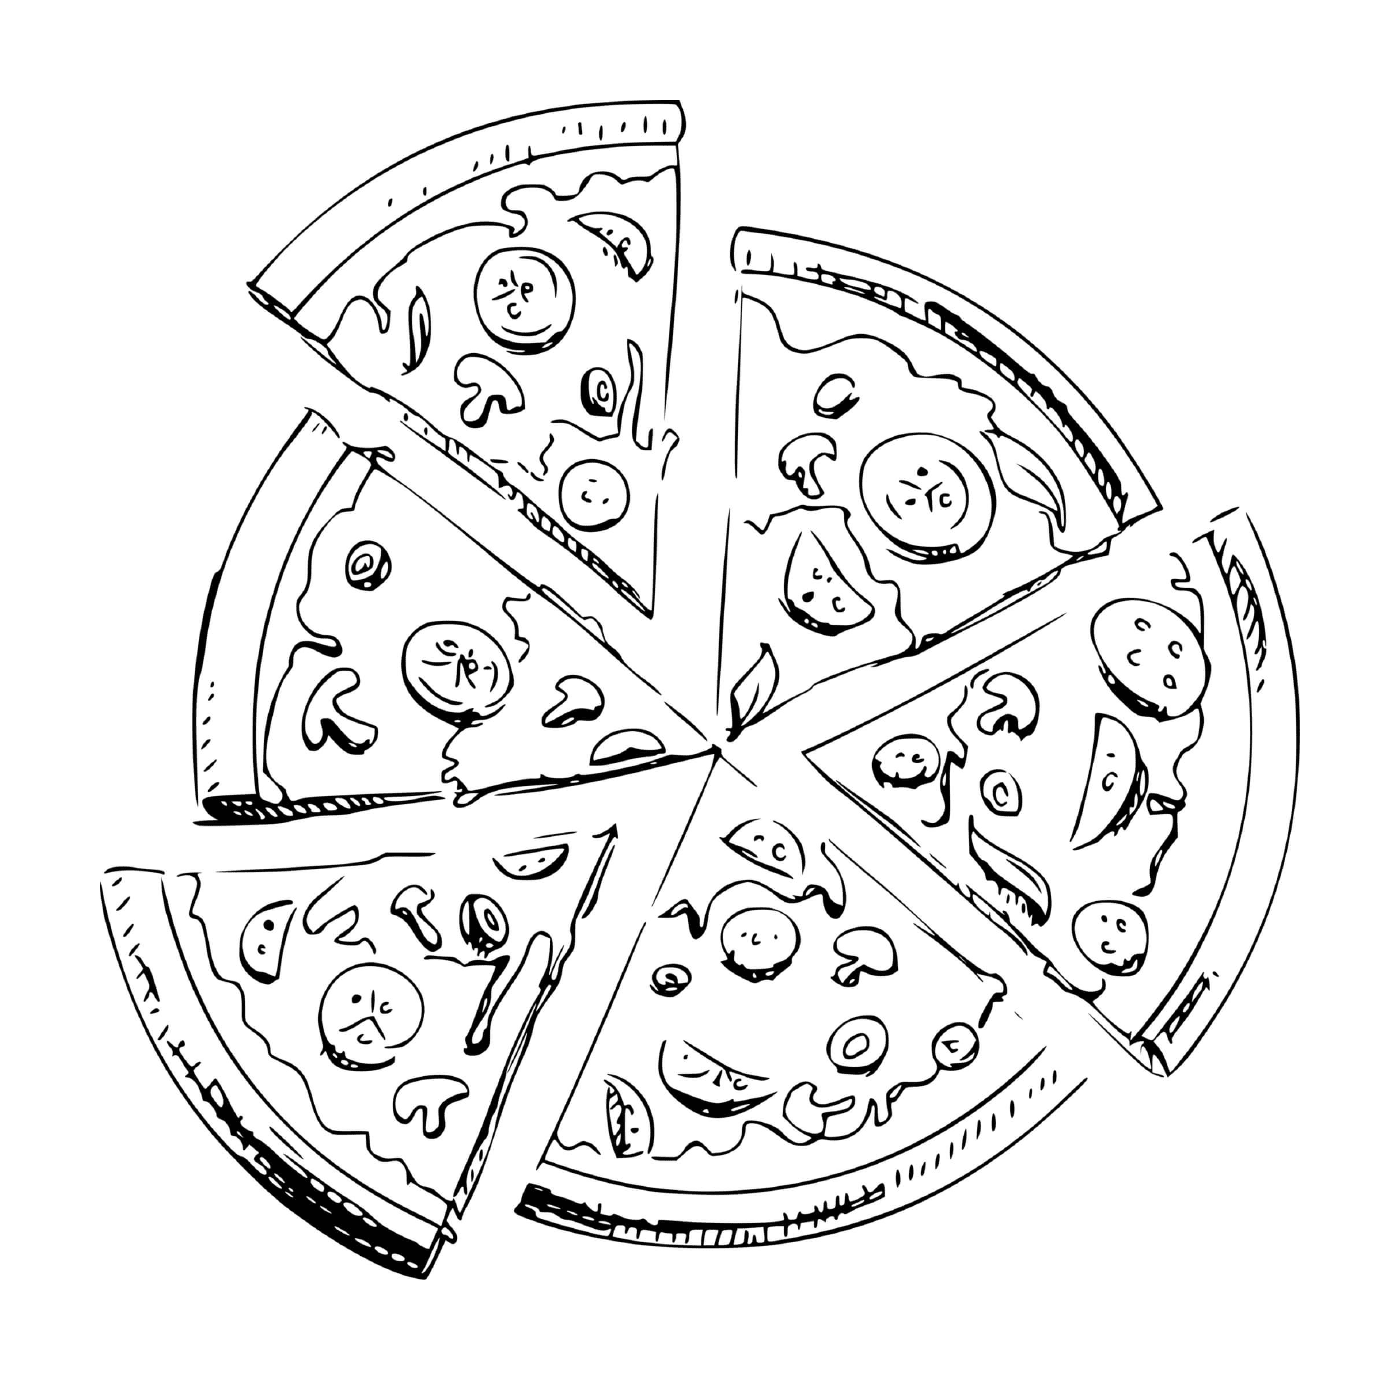  Six pieces of pizza 